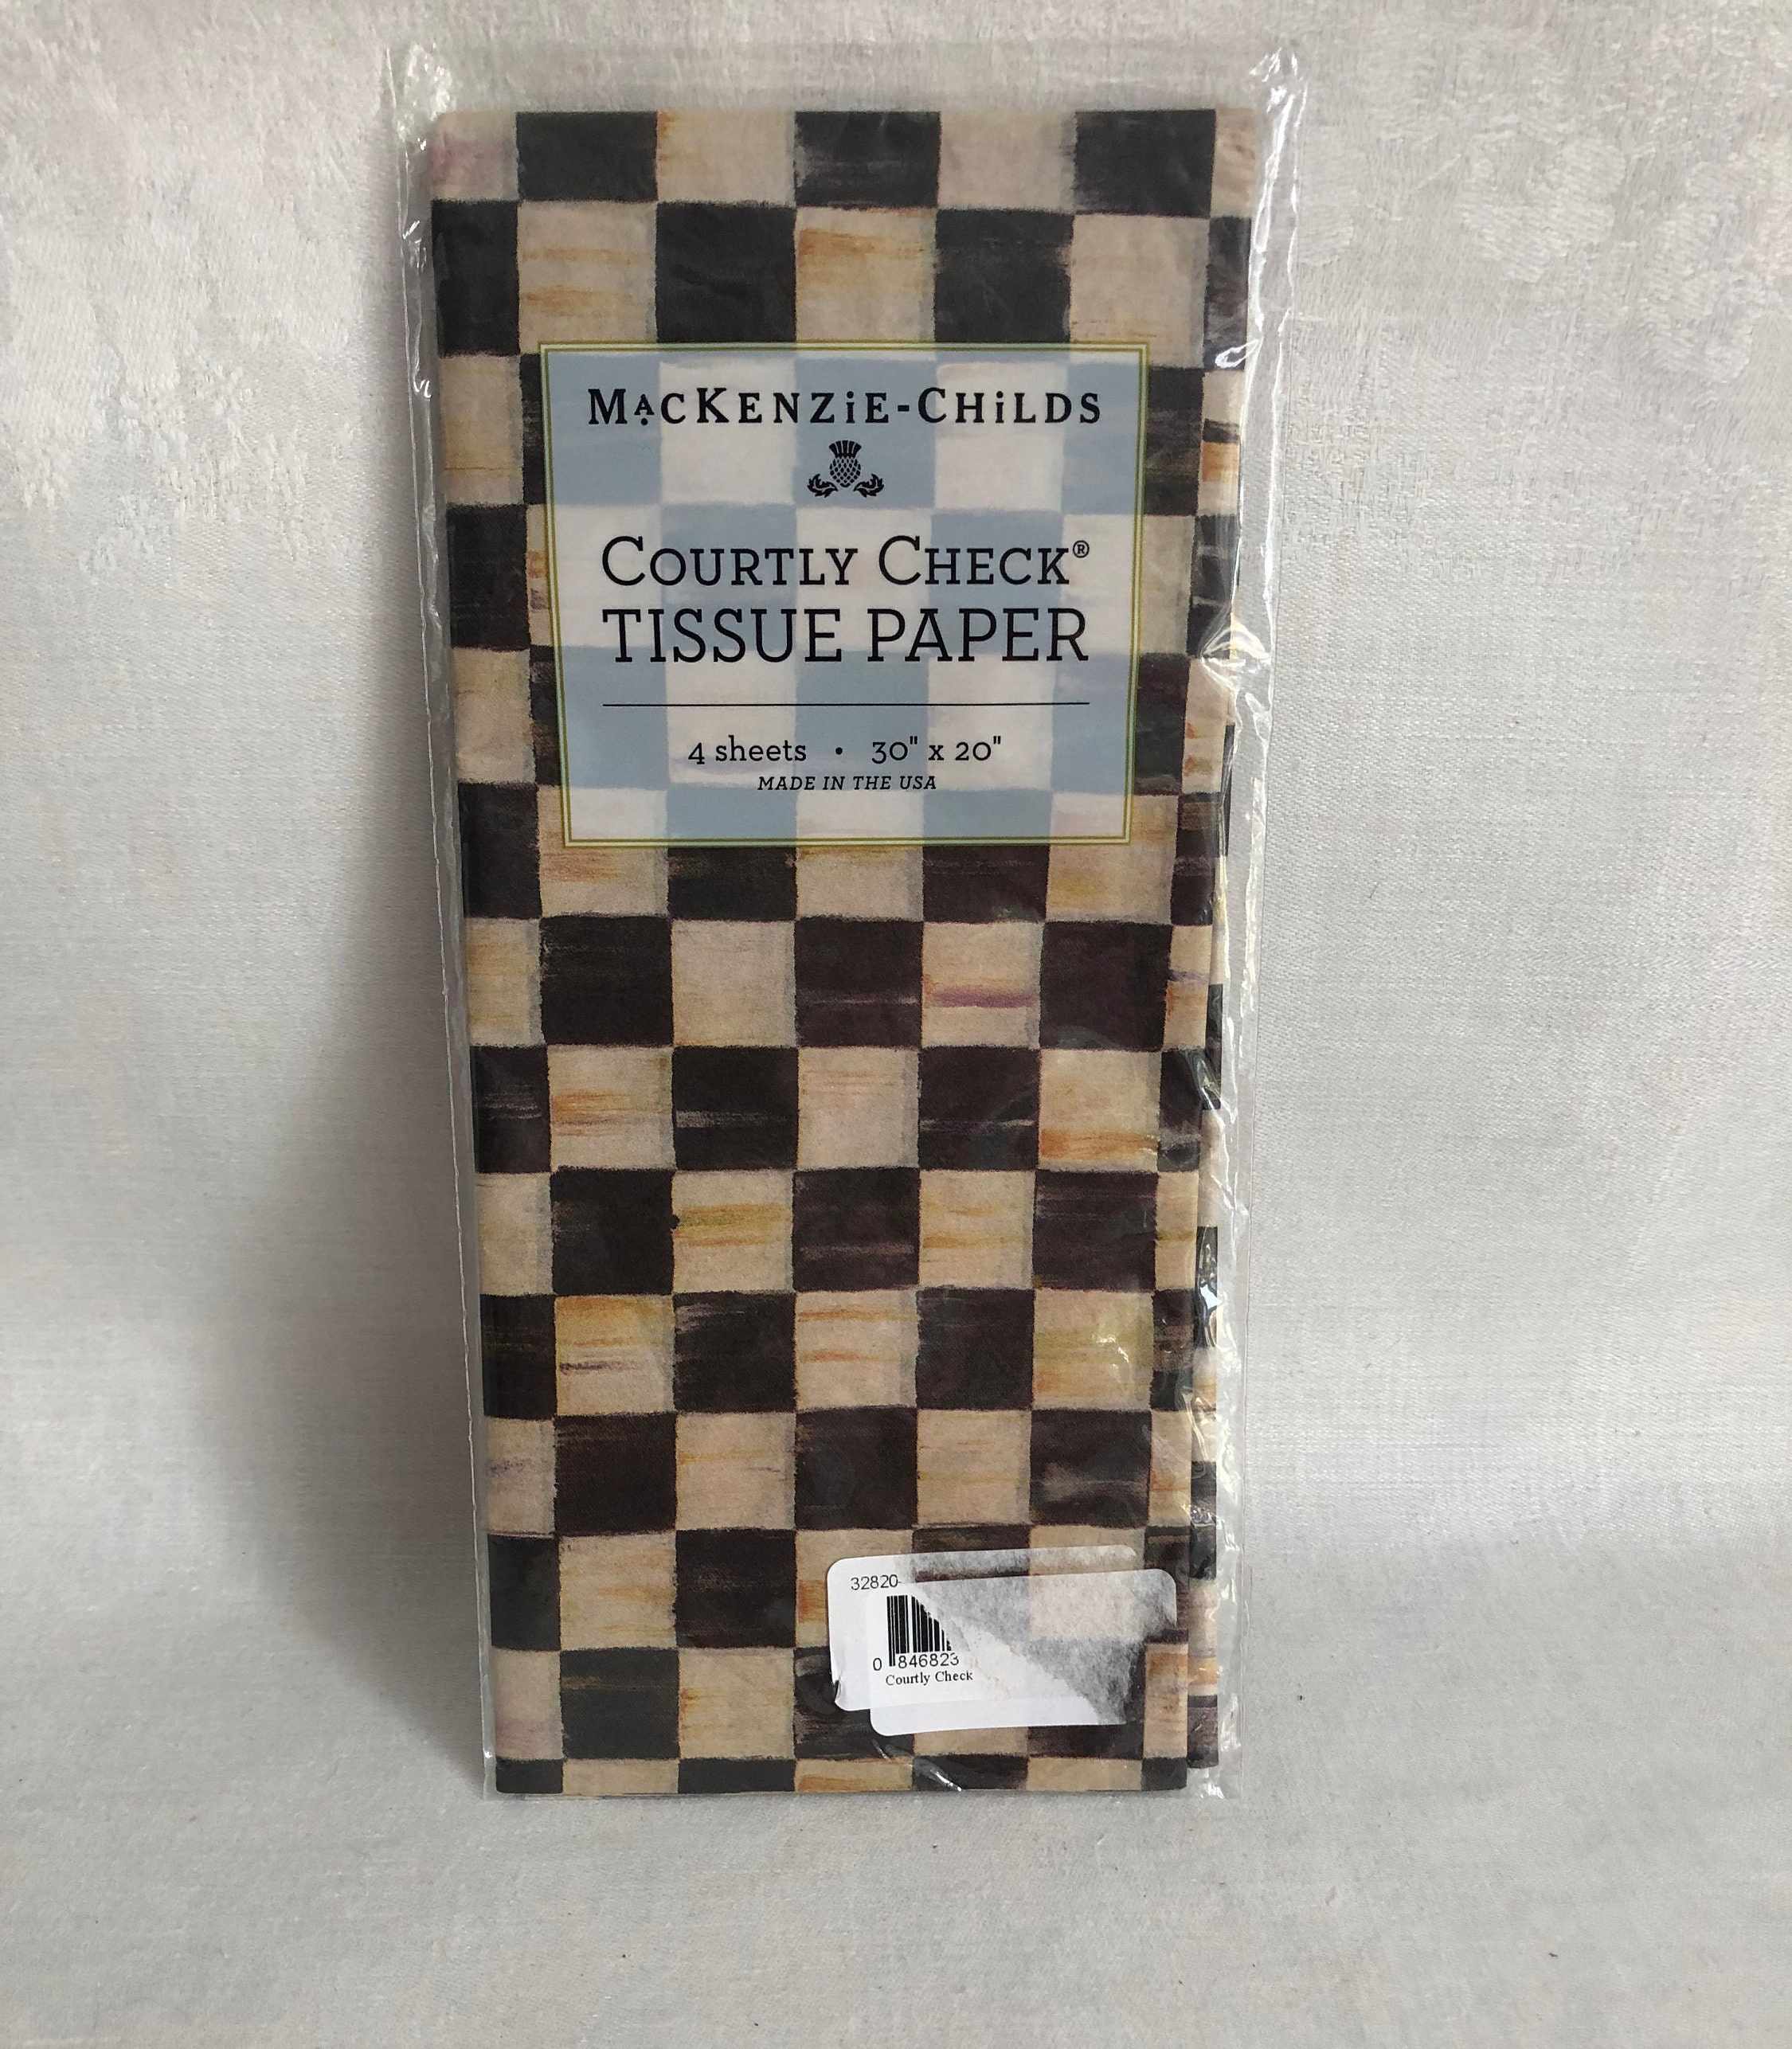 MacKenzie-Childs Courtly Check Cord Cover